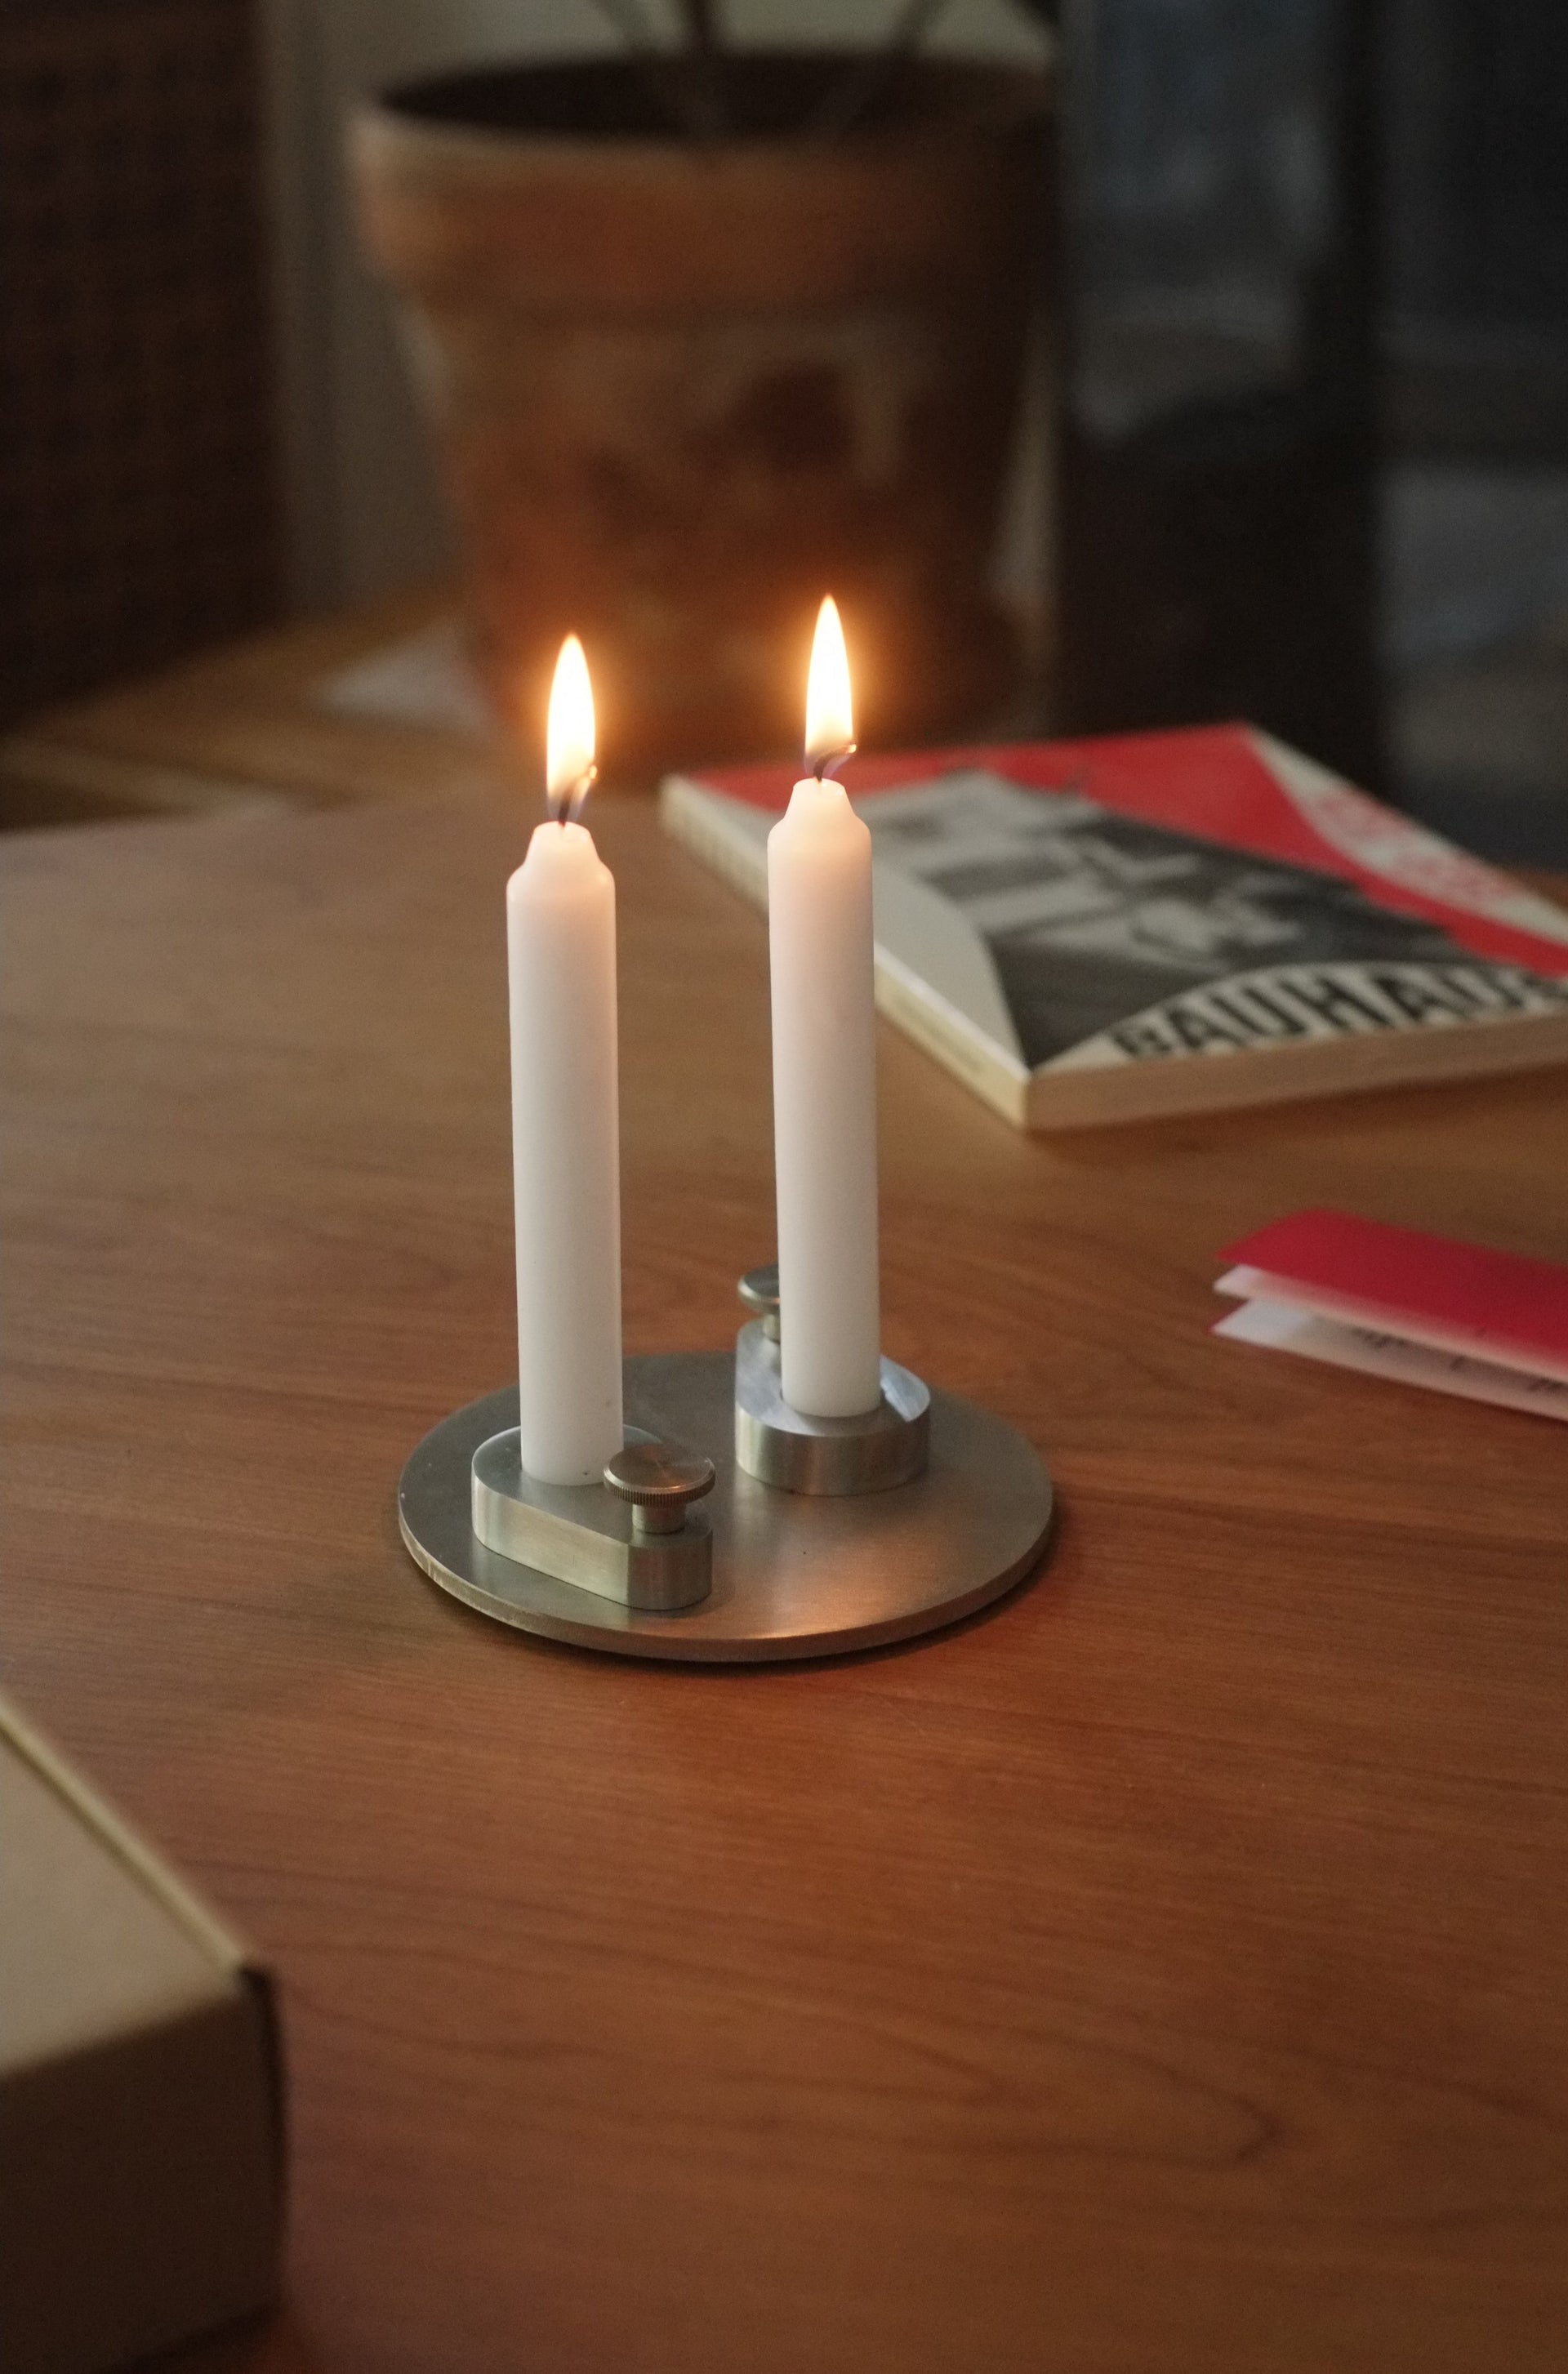 Industrial Shabbat candle holders by Jonny Cohen for Lichen